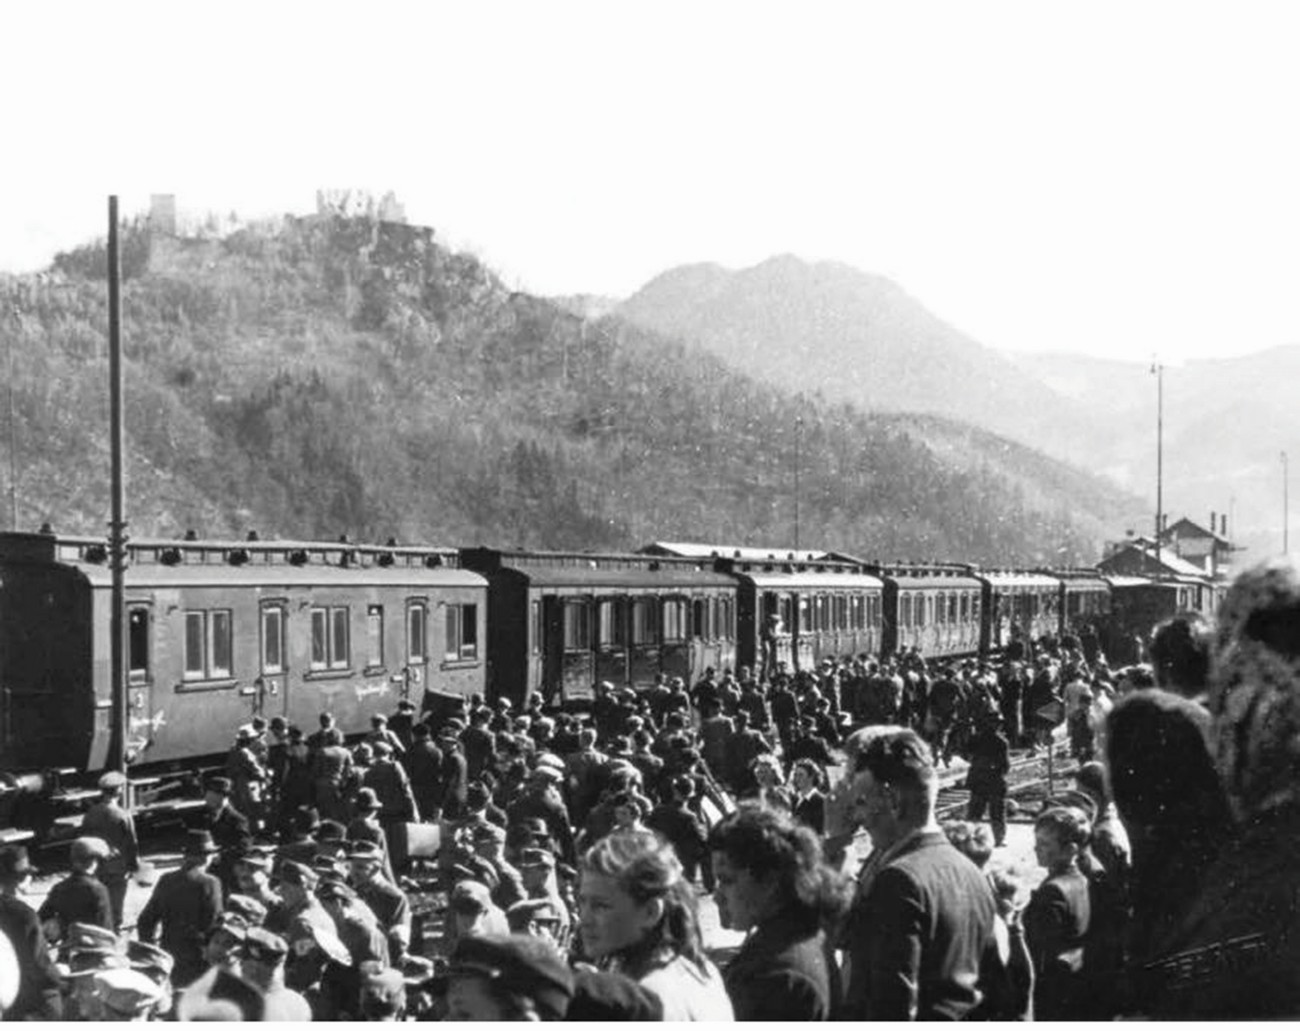 Young Slovene boys, forced to conscript into the German Army, are gathering at the Celje railway station to travel to the theatres of war throughout Europe. Source: the book S puško in knjigo/With a Rifle and a Book (author Božo Repe). Muzej novejše zgodovine Celje.